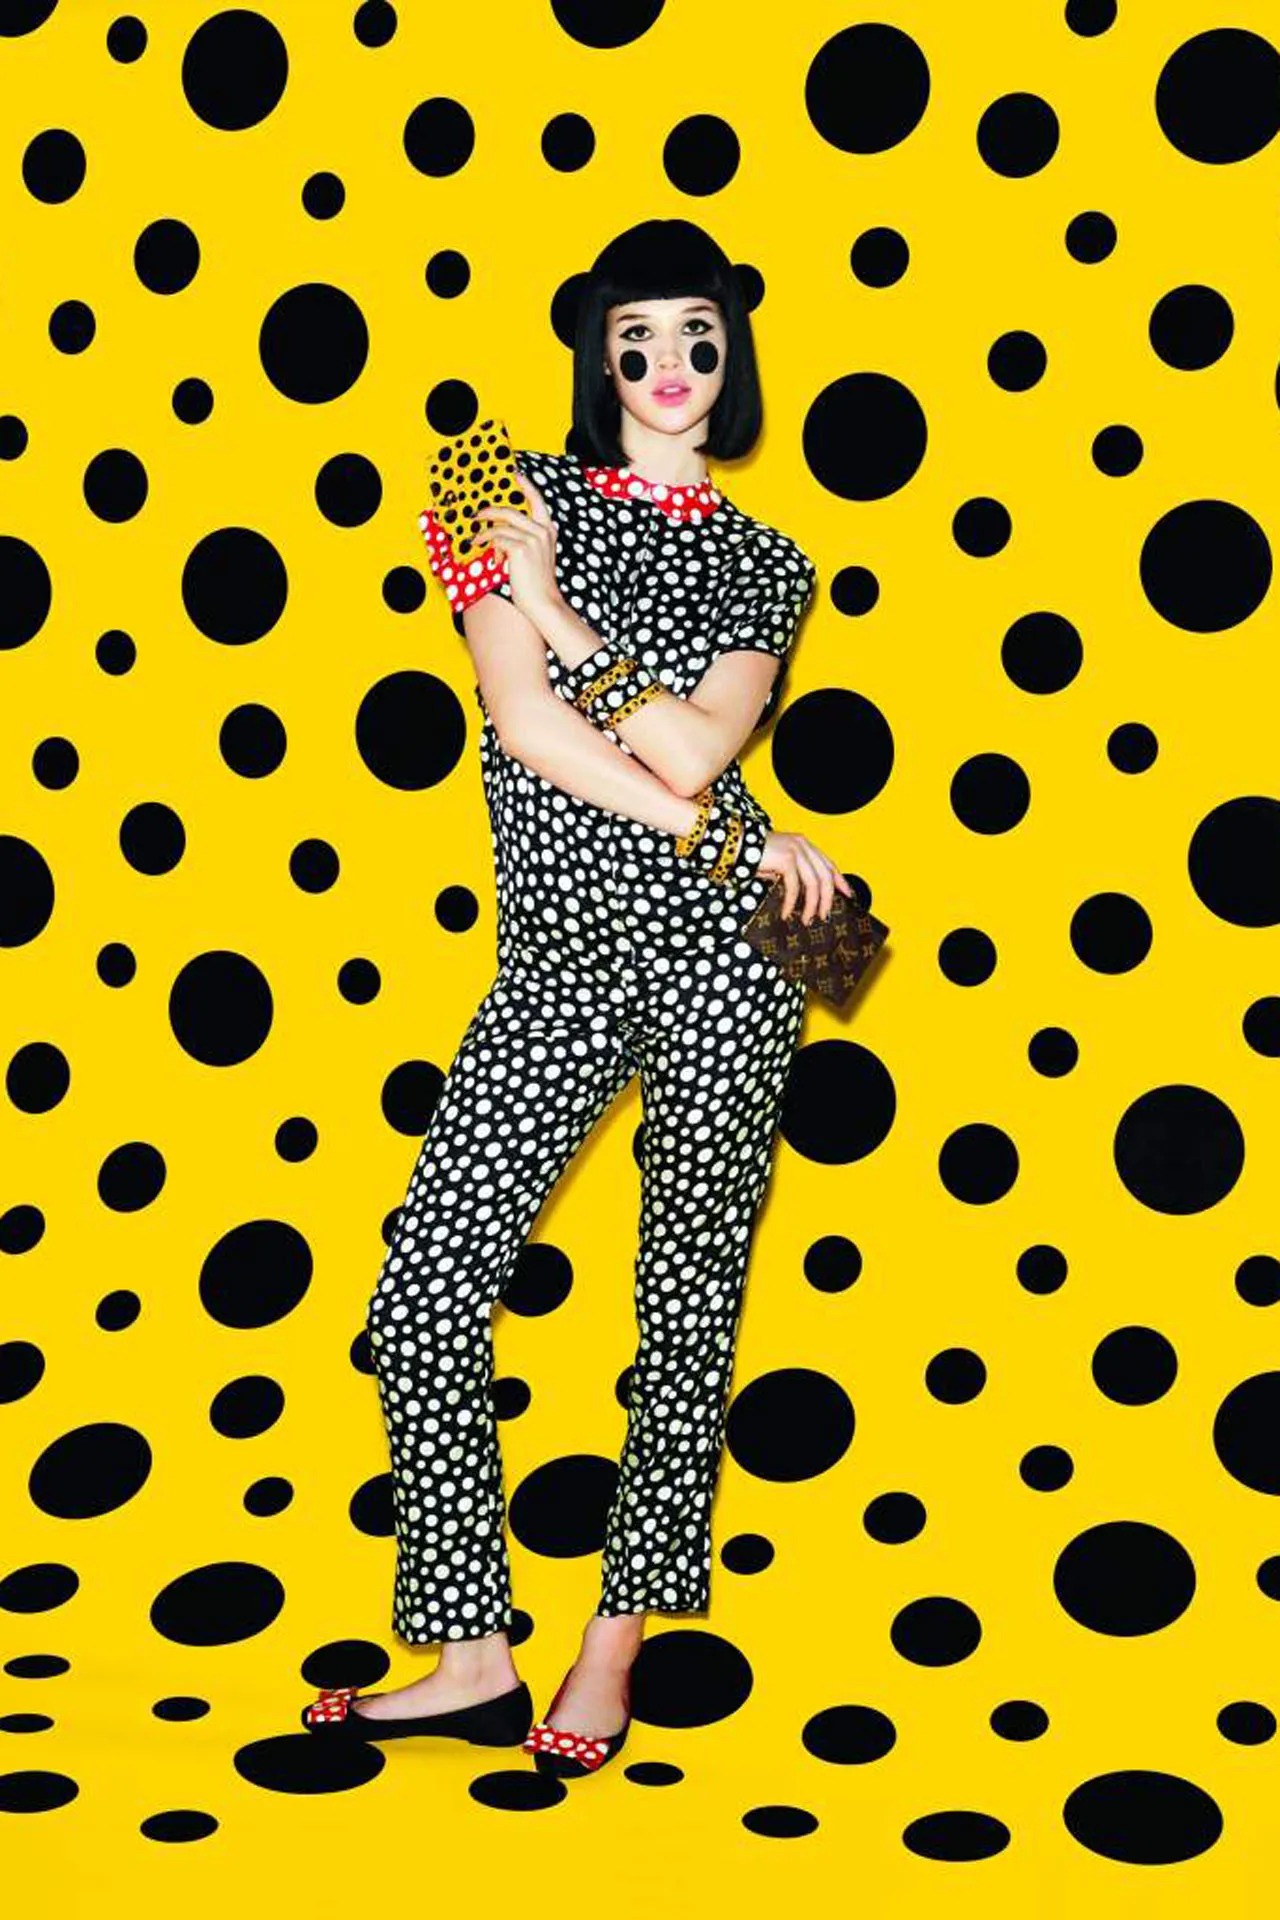 The Louis Vuitton x Yayoi Kusama collection is for the optimist in you